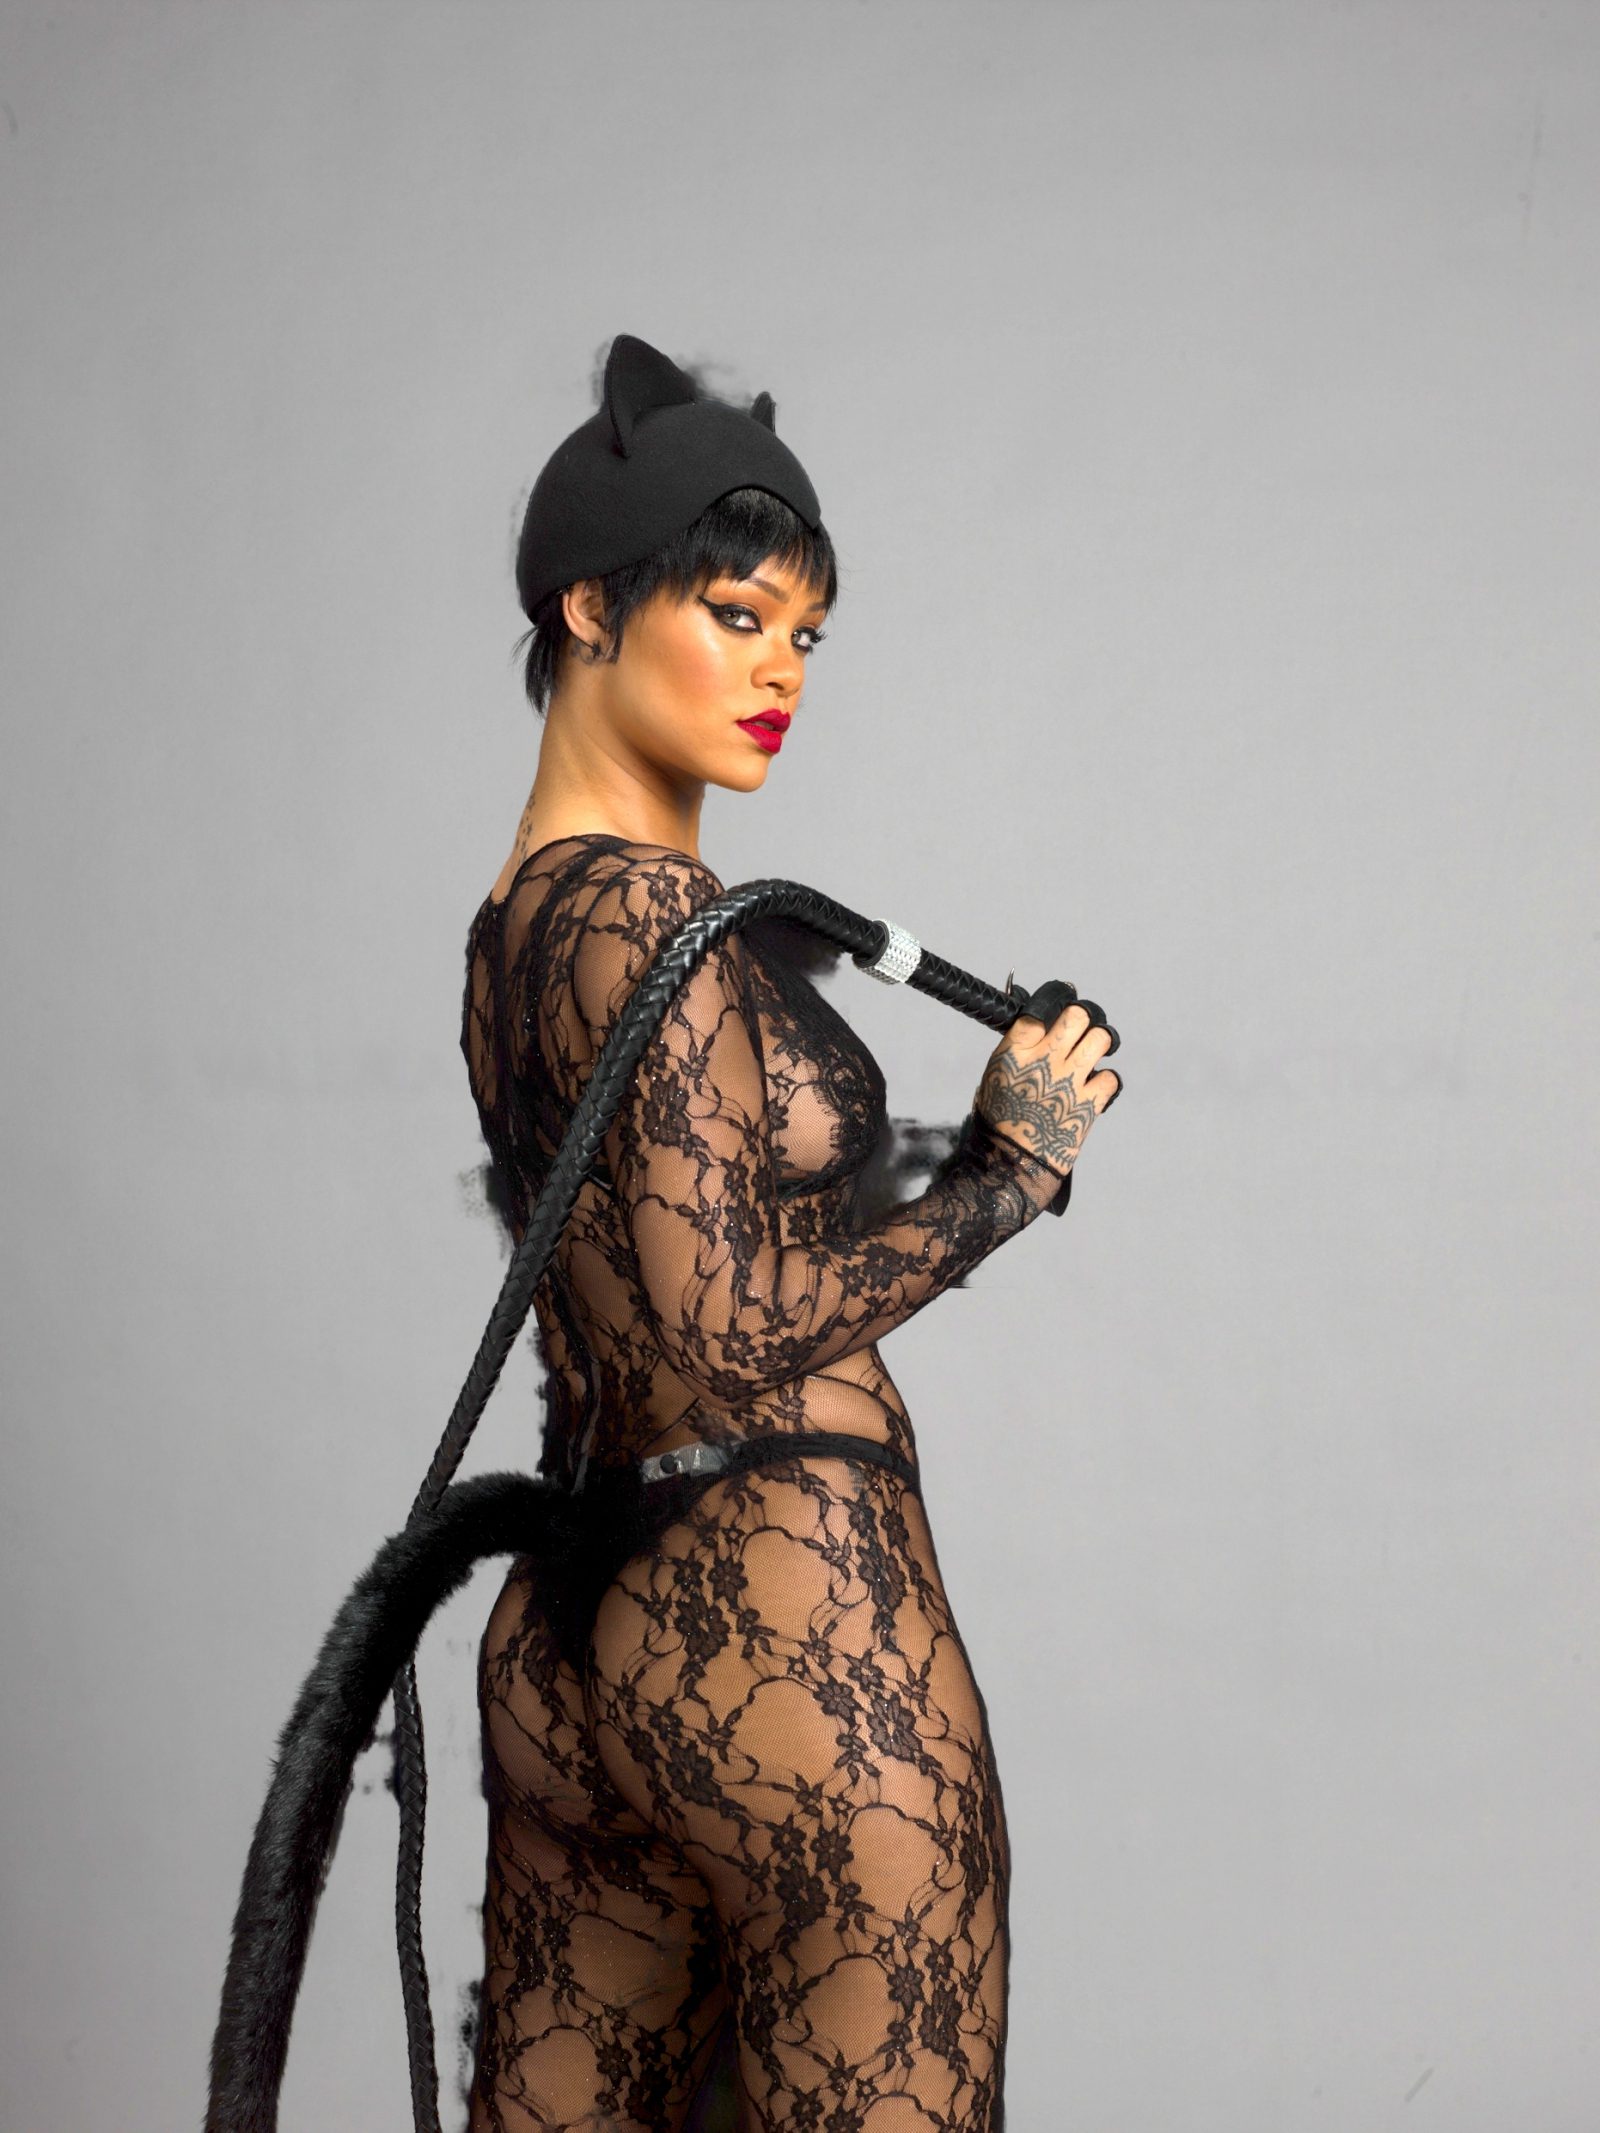 Rihannas bootylicious outtakes from a 2017 photoshoot